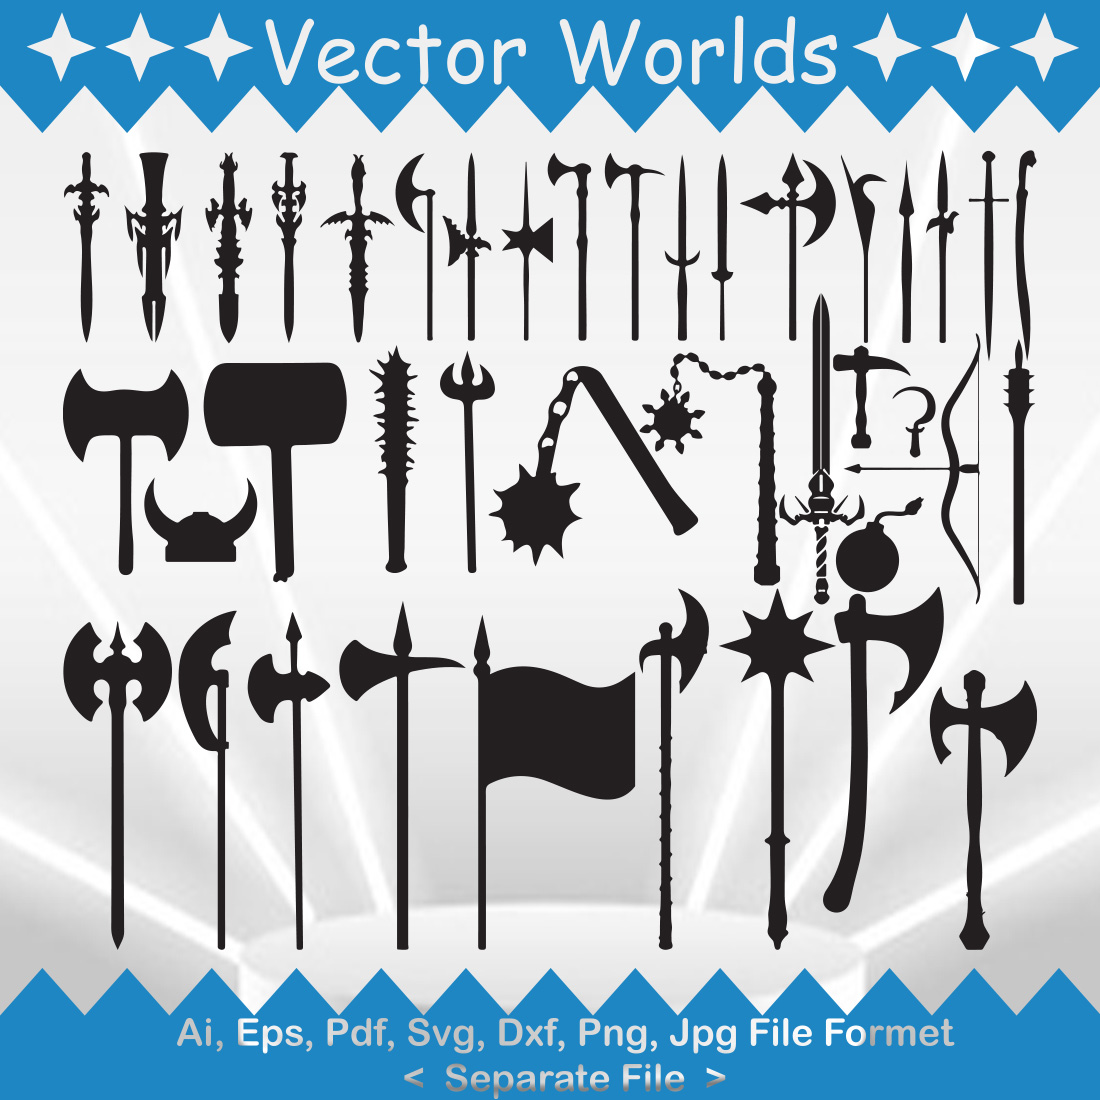 Medieval Weapon SVG Vector Design cover image.